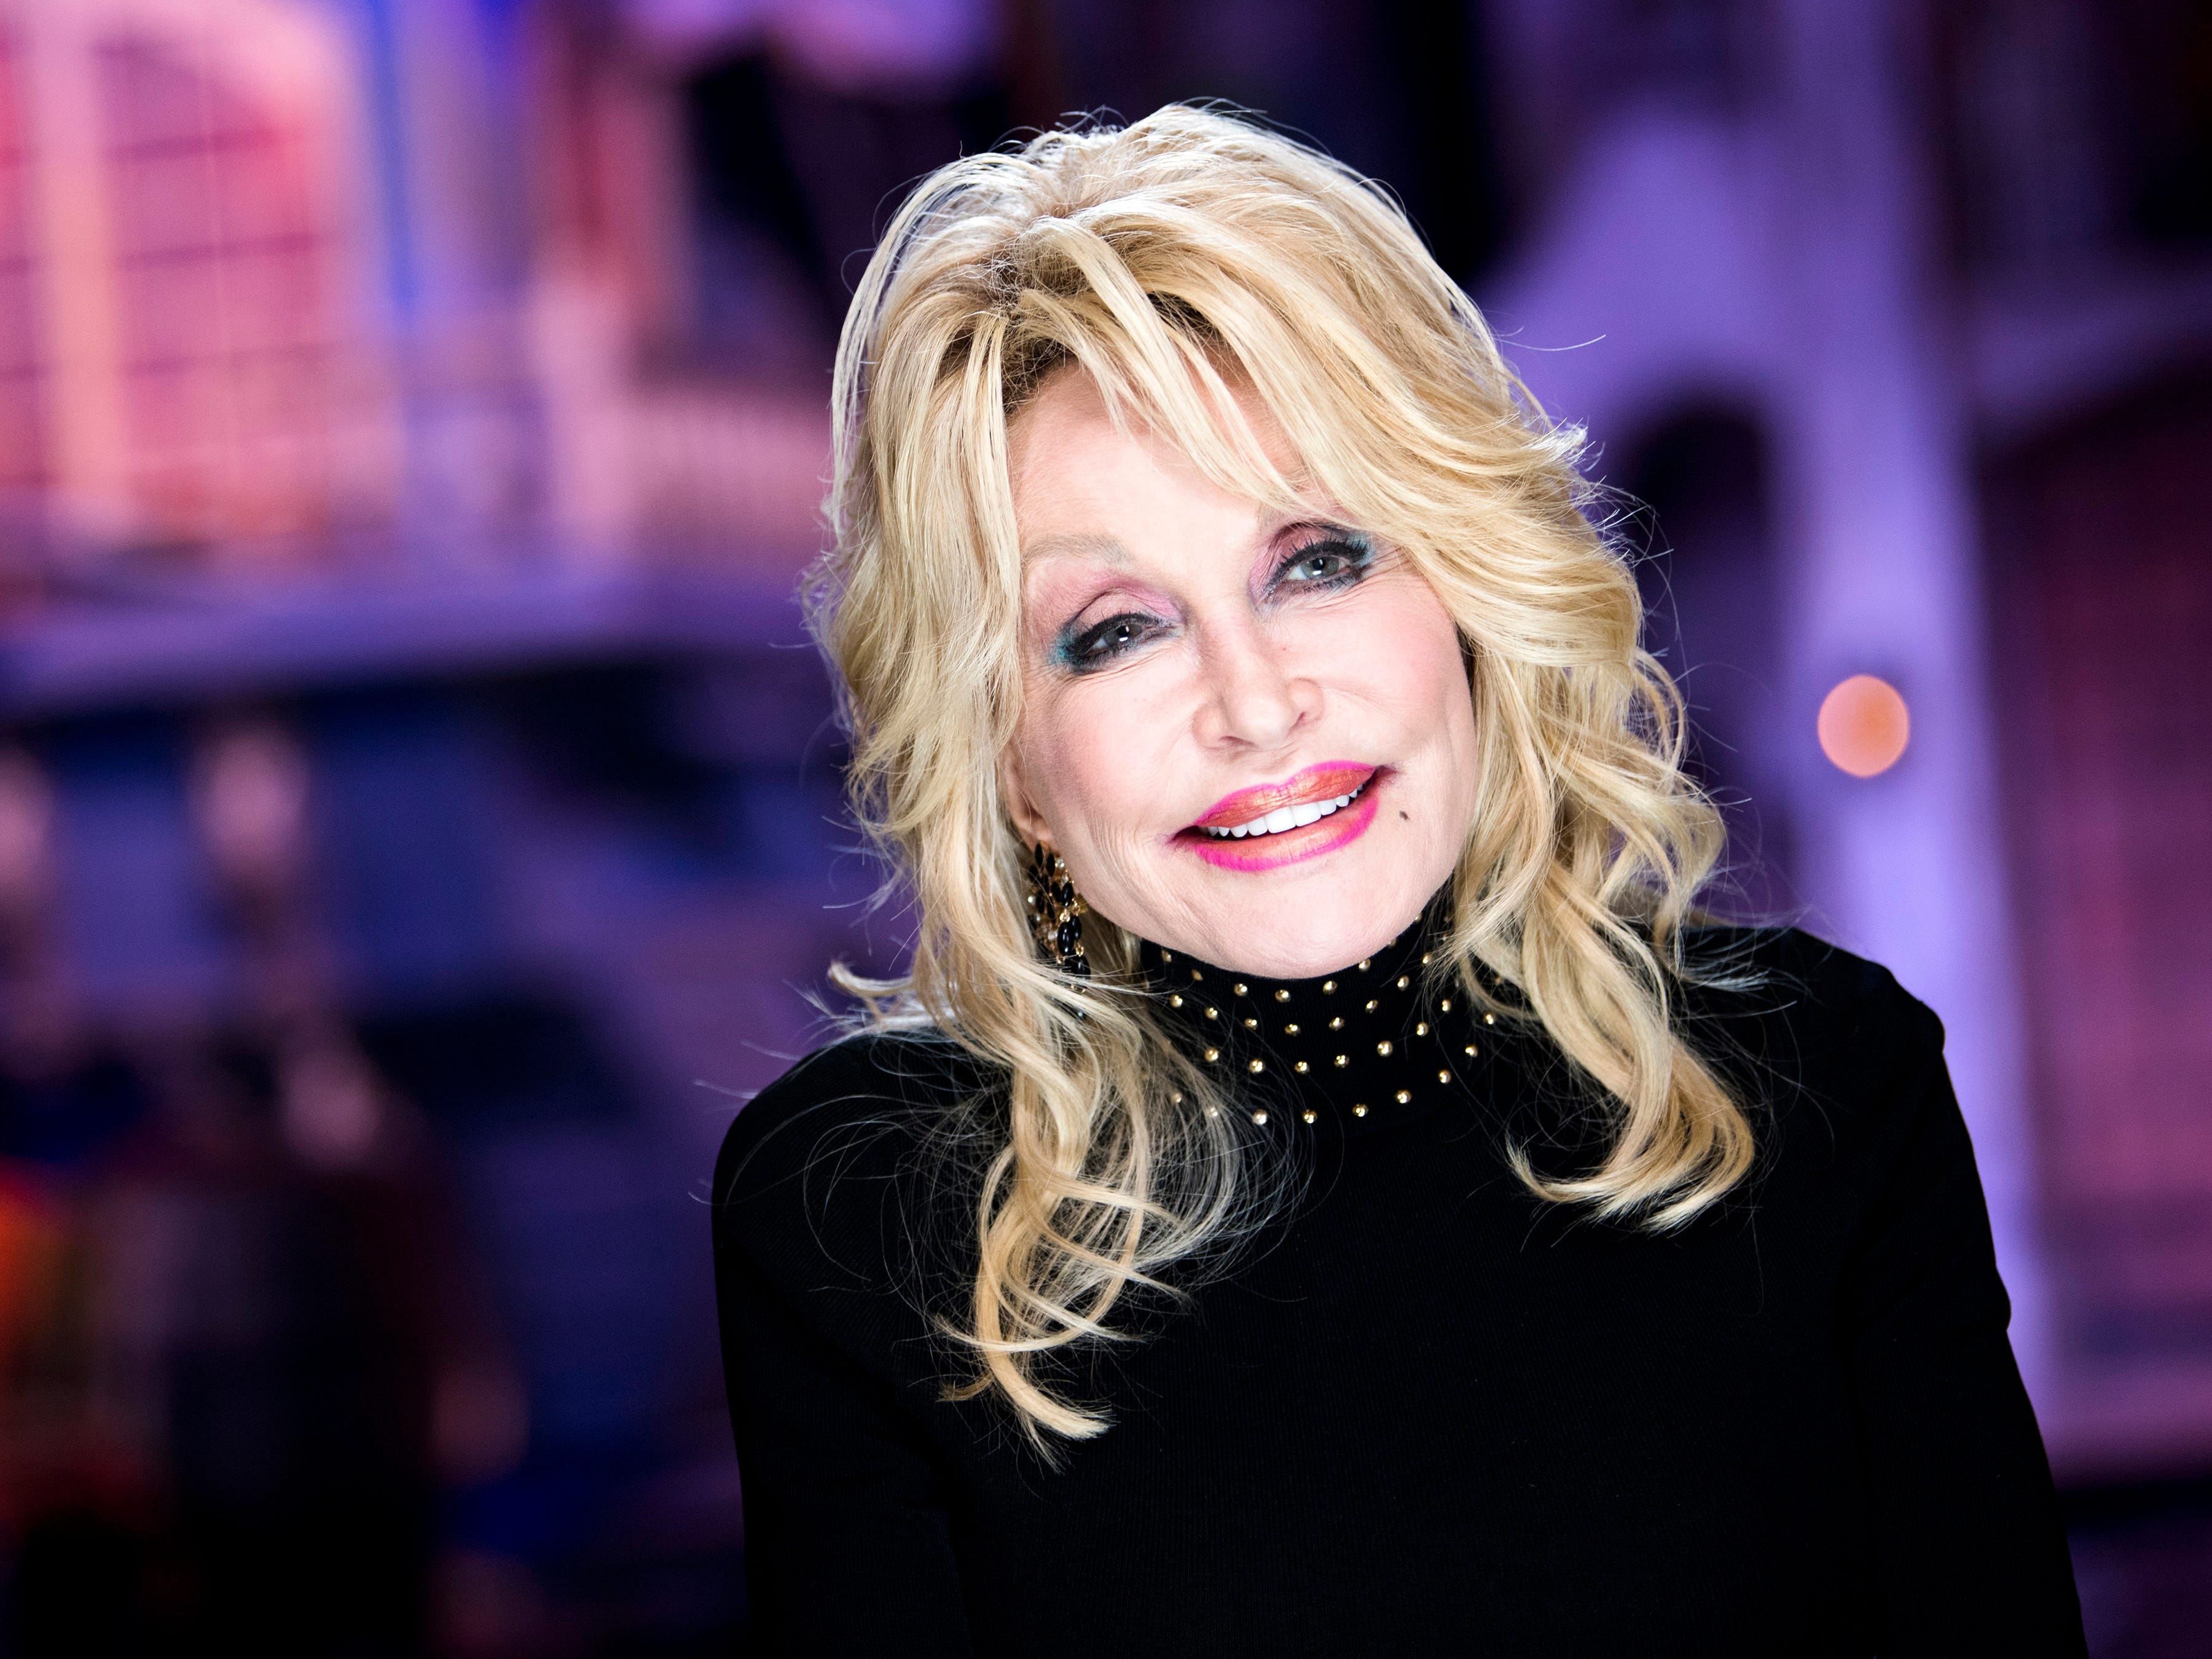 Dolly Parton on growing up in Tennessee, her faith, family and fans